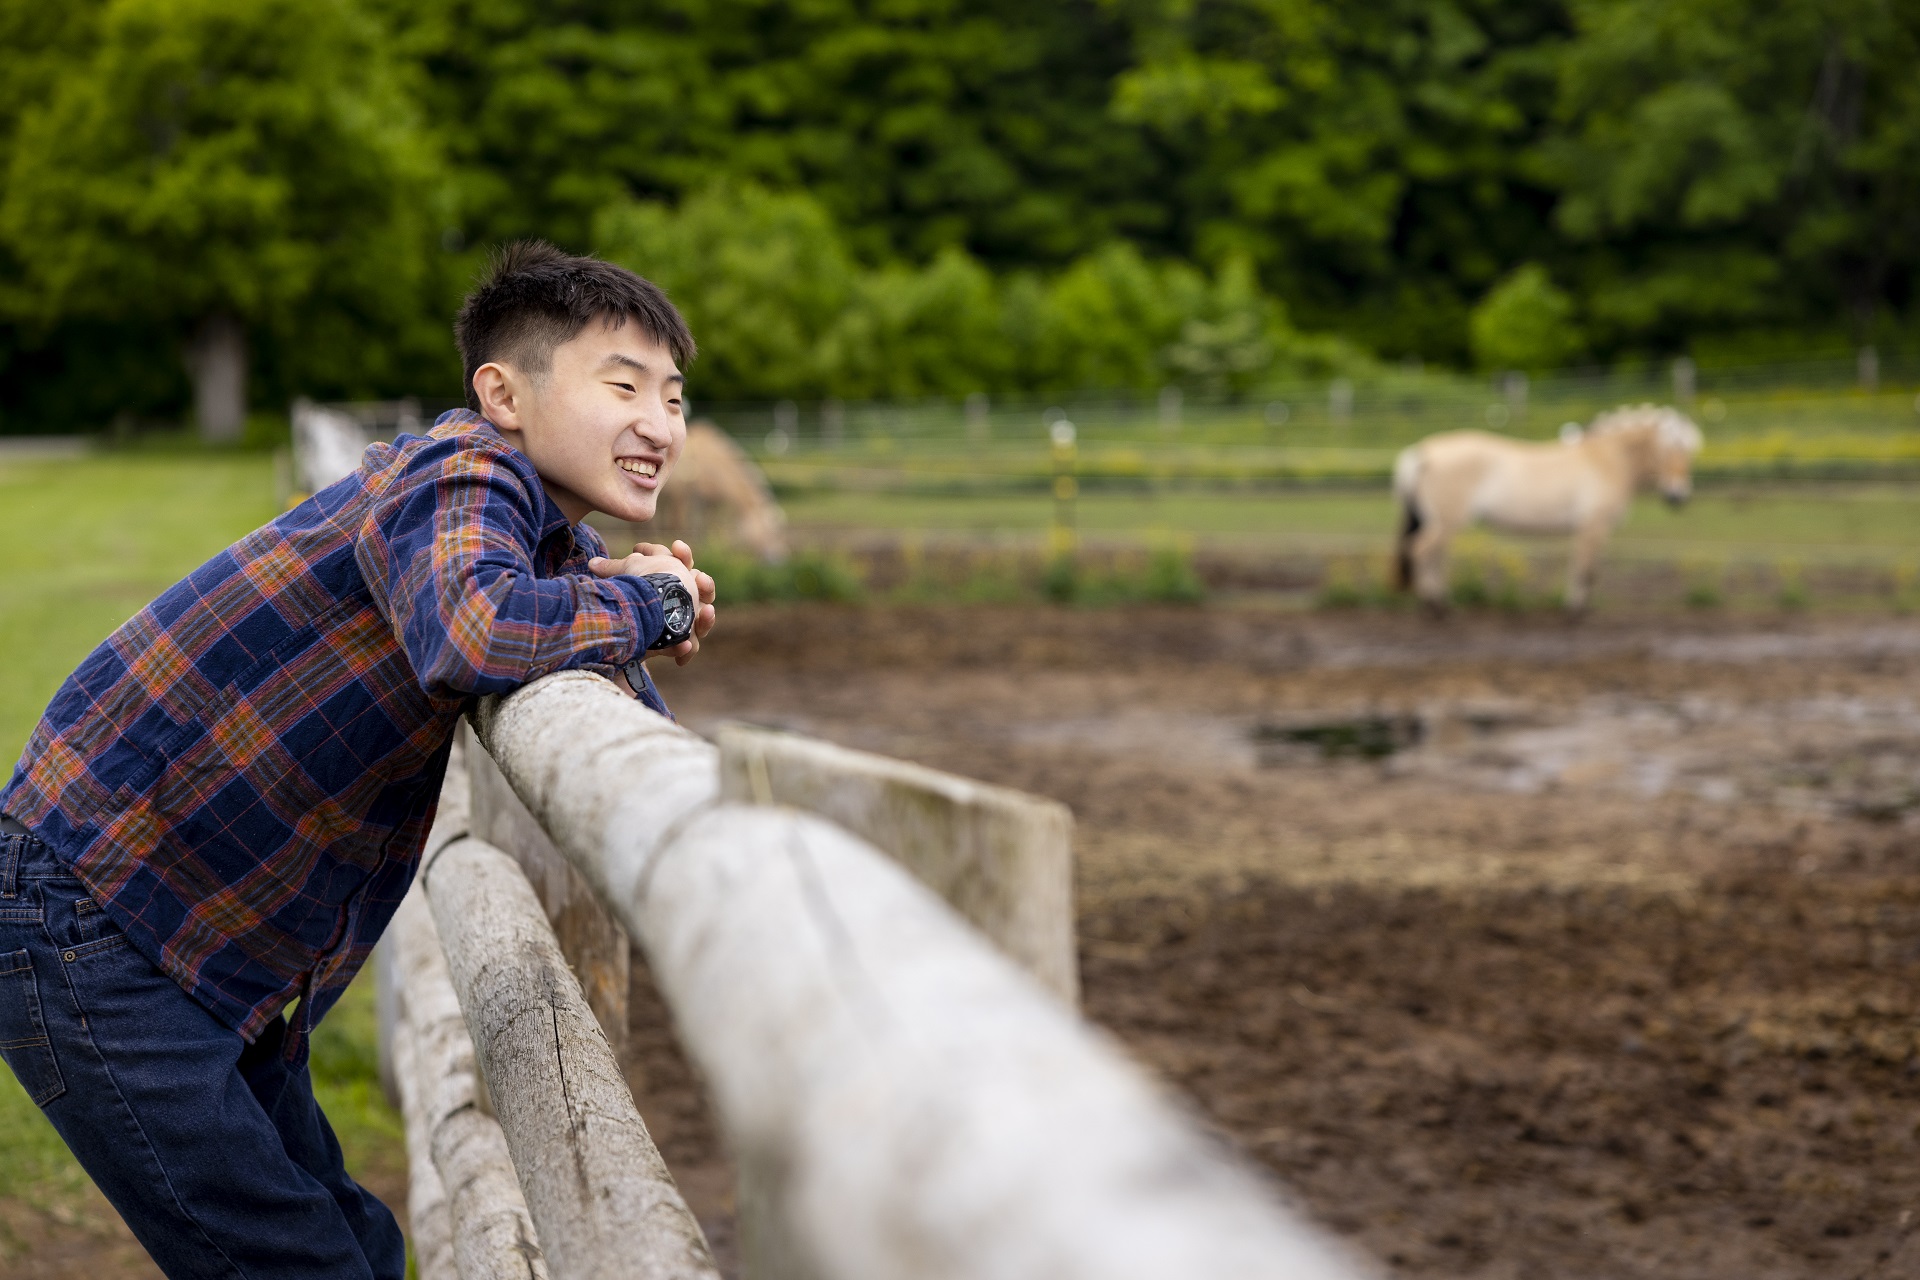 Aidan looks at horses while volunteering with the Saddle Up For Success program at Hope Haven Therapeutic Riding and Wellness Centre in Markdale, Ontario, Canada on Thursday, June 9, 2022. Hydro One has provided Hope Haven Therapeutic Riding and Wellnes